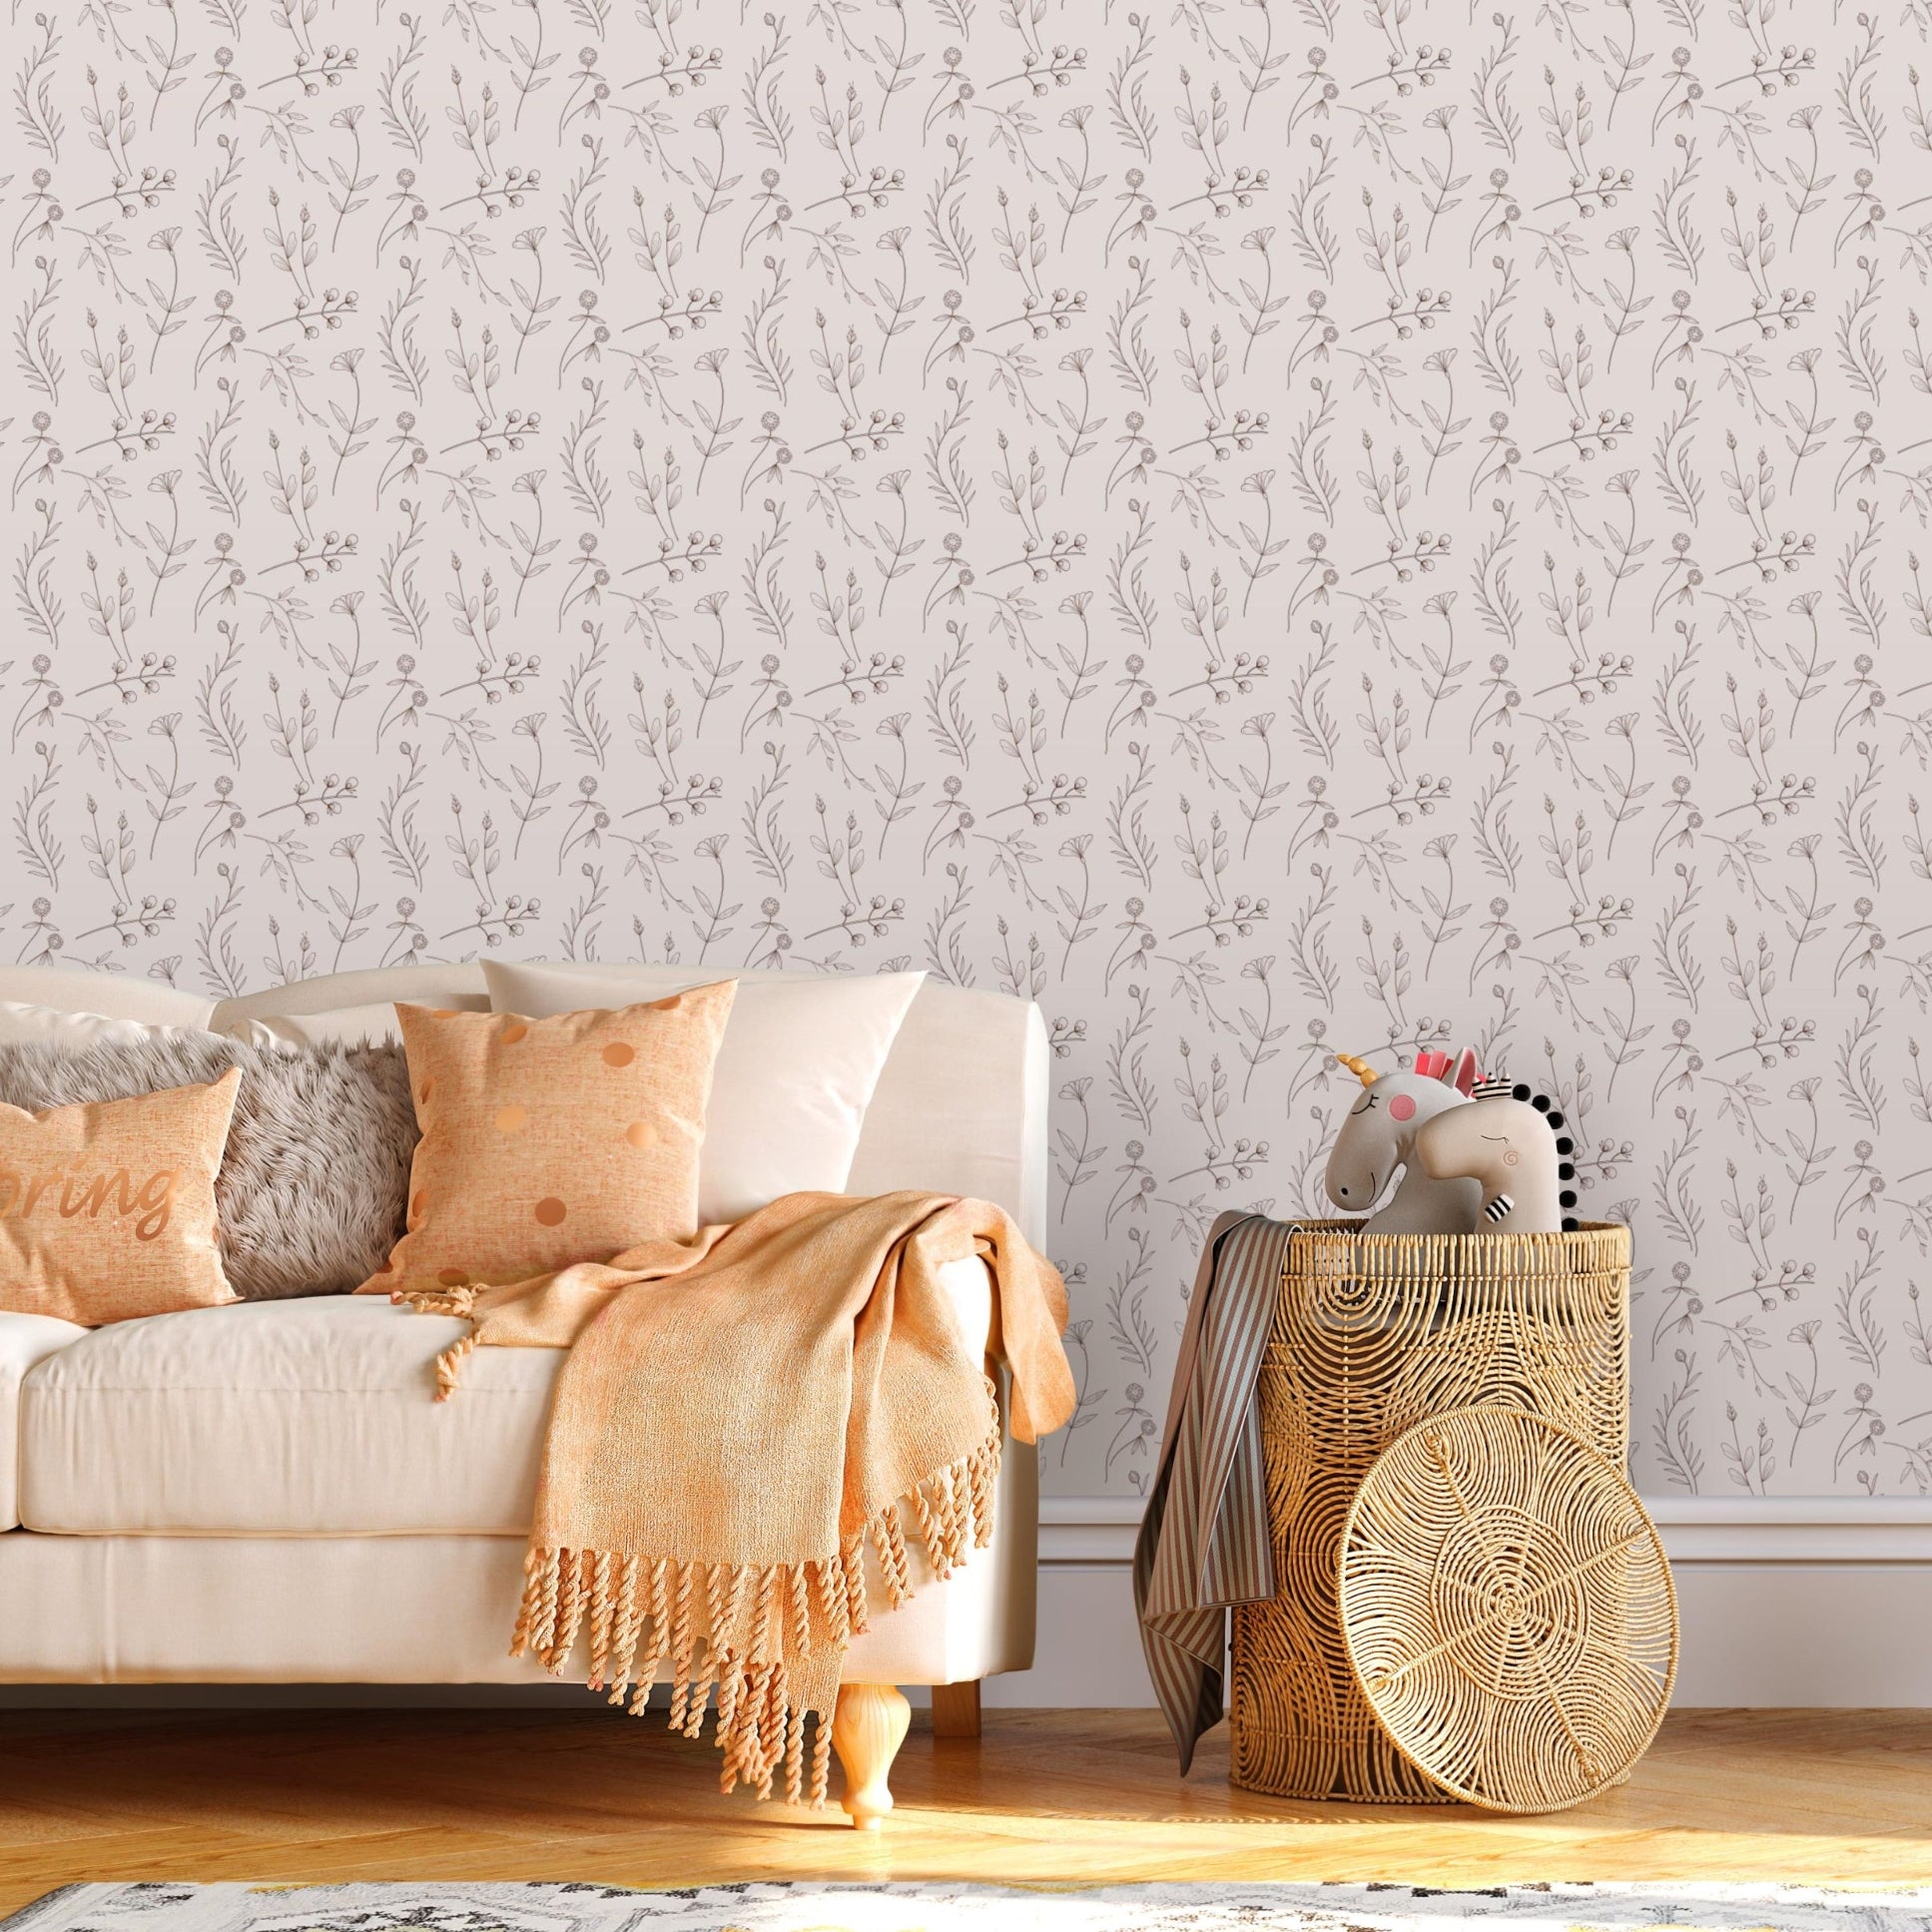 Gray Floral Peel and Stick Wallpaper - Meadow's Bloom